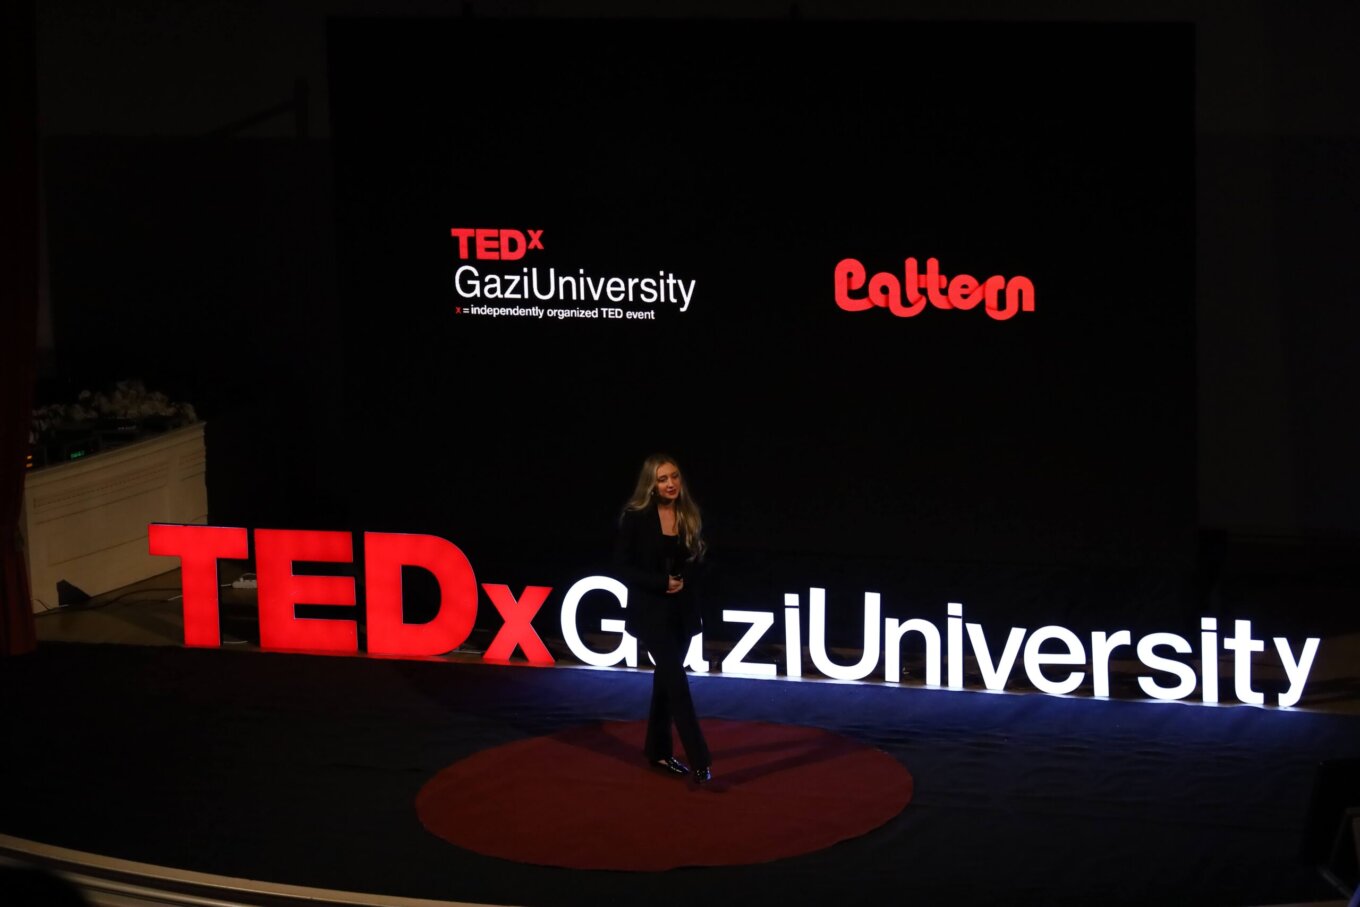 Psychologist Nefise Shaban, an esteemed member of our alumni community, delivered a lecture at the prestigious TEDx event hosted by Gazi University.